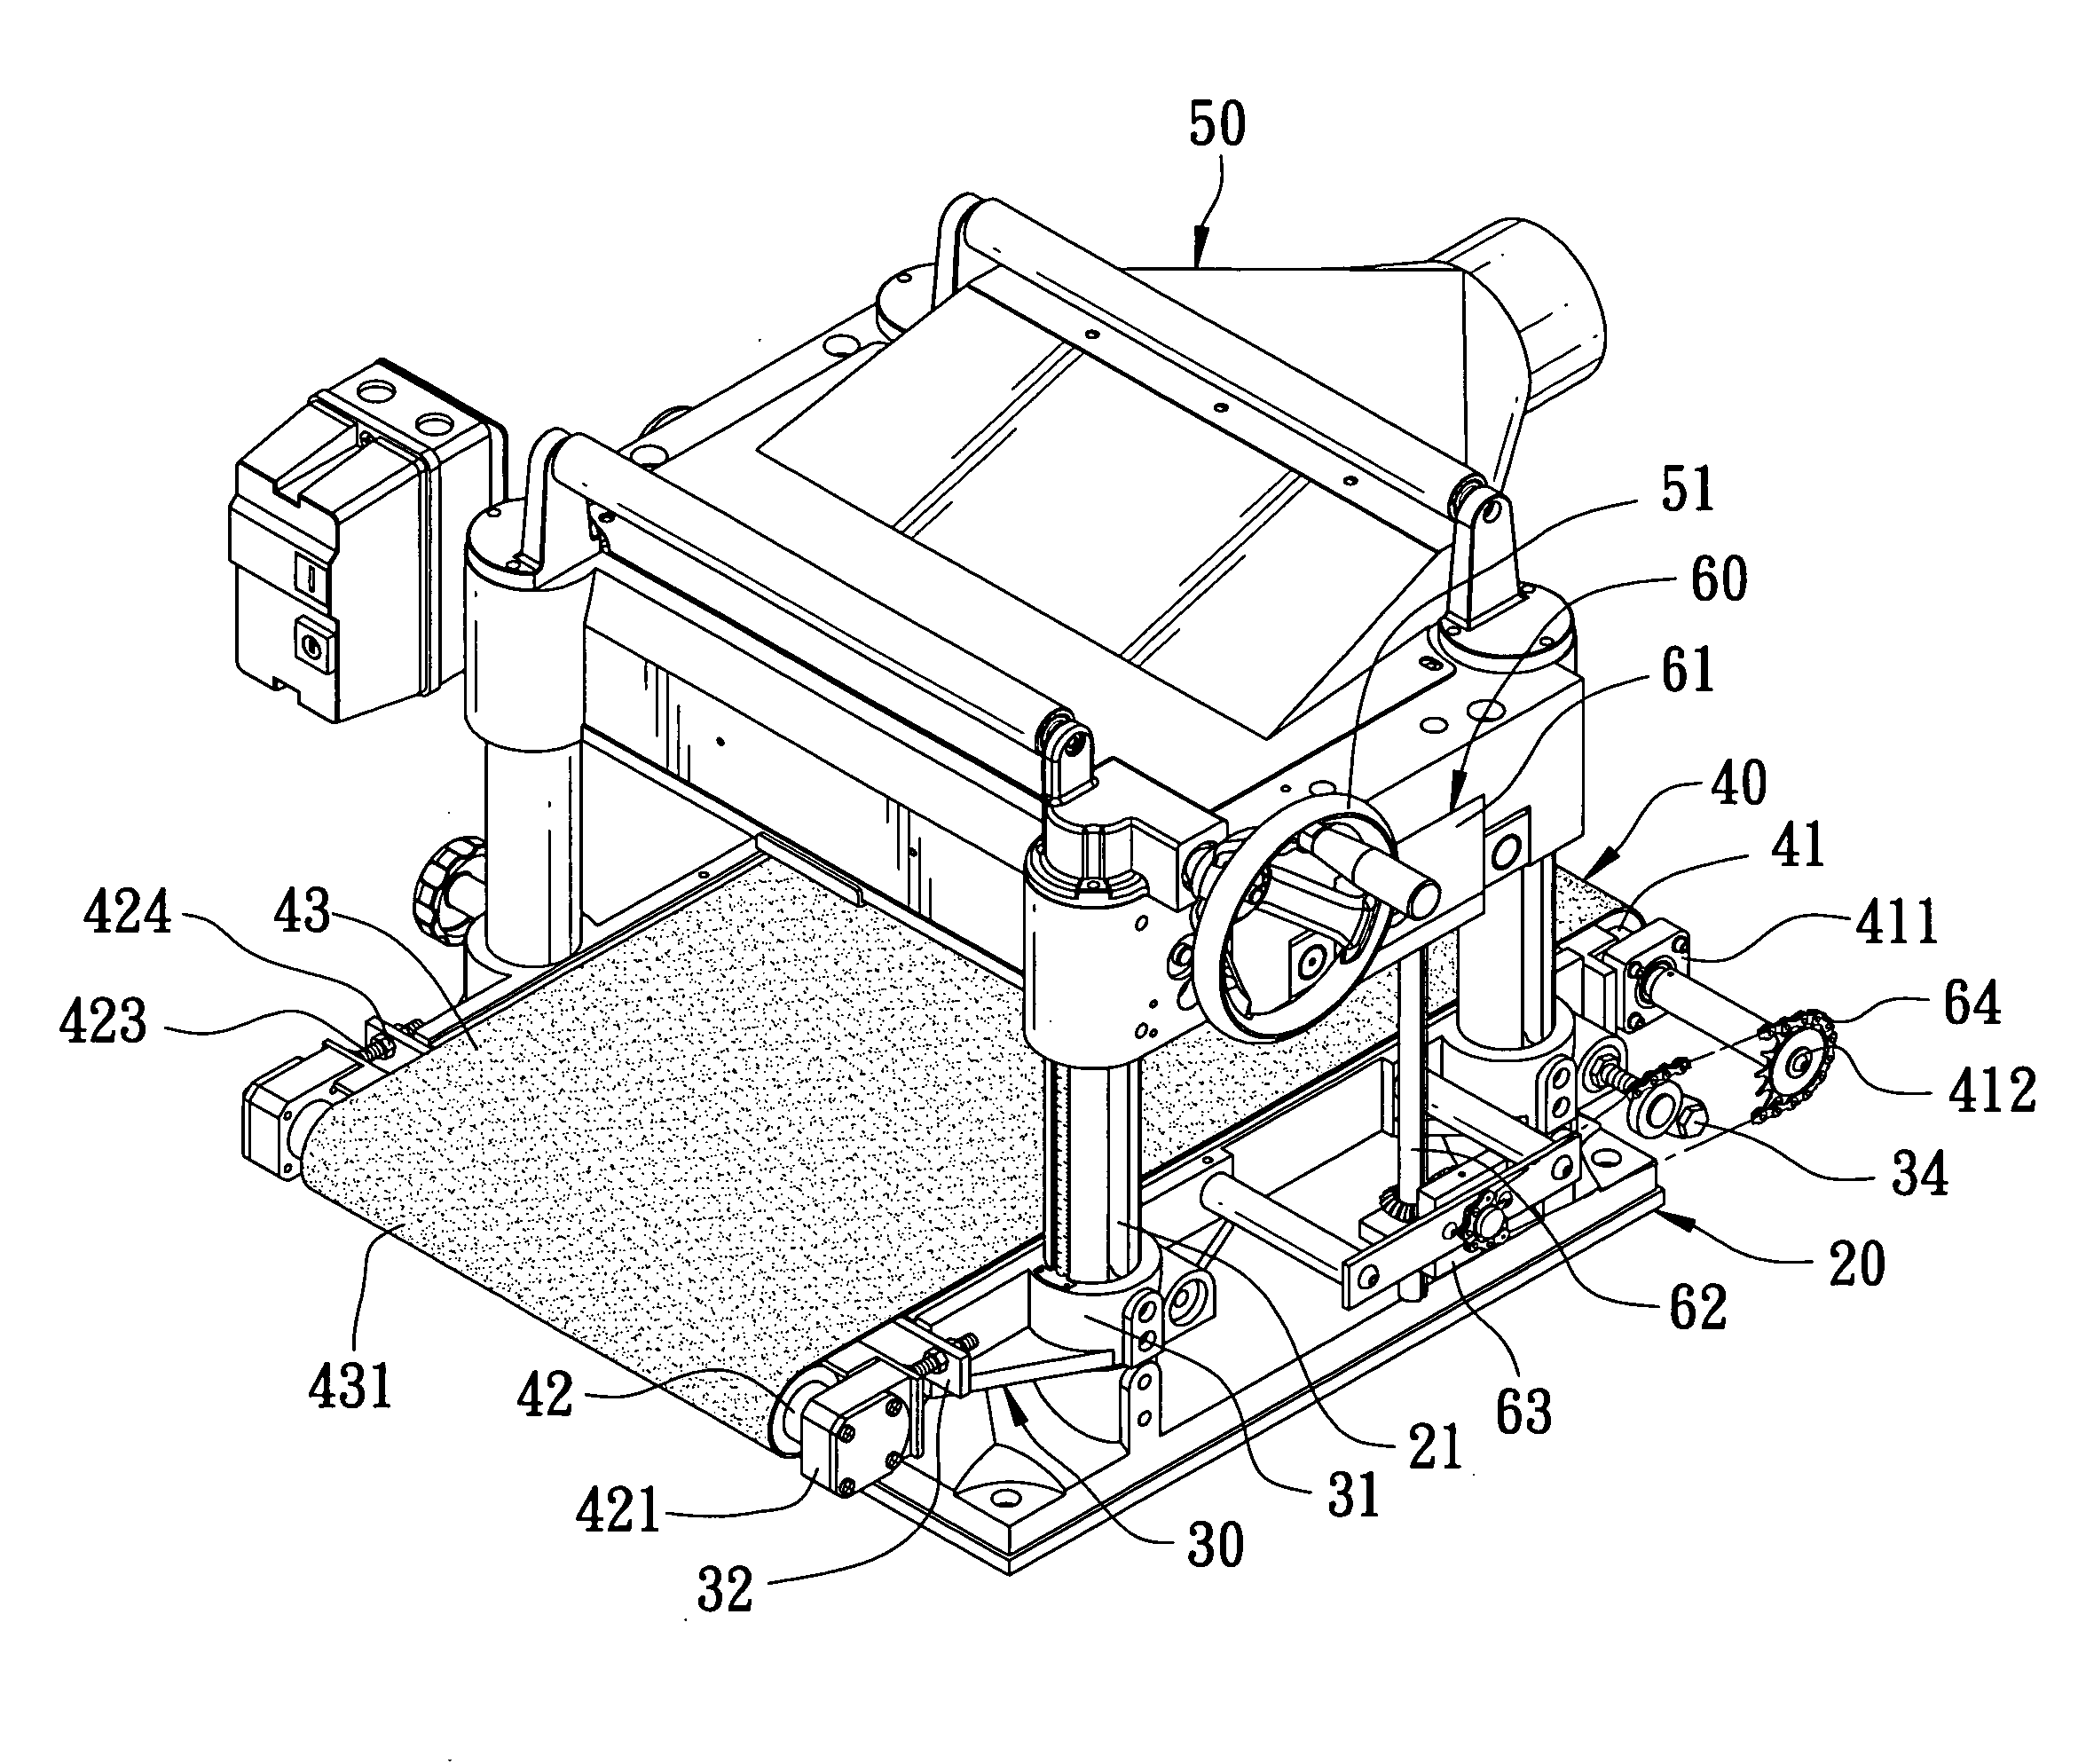 Work feeding and conveying mechanism for a planing machine